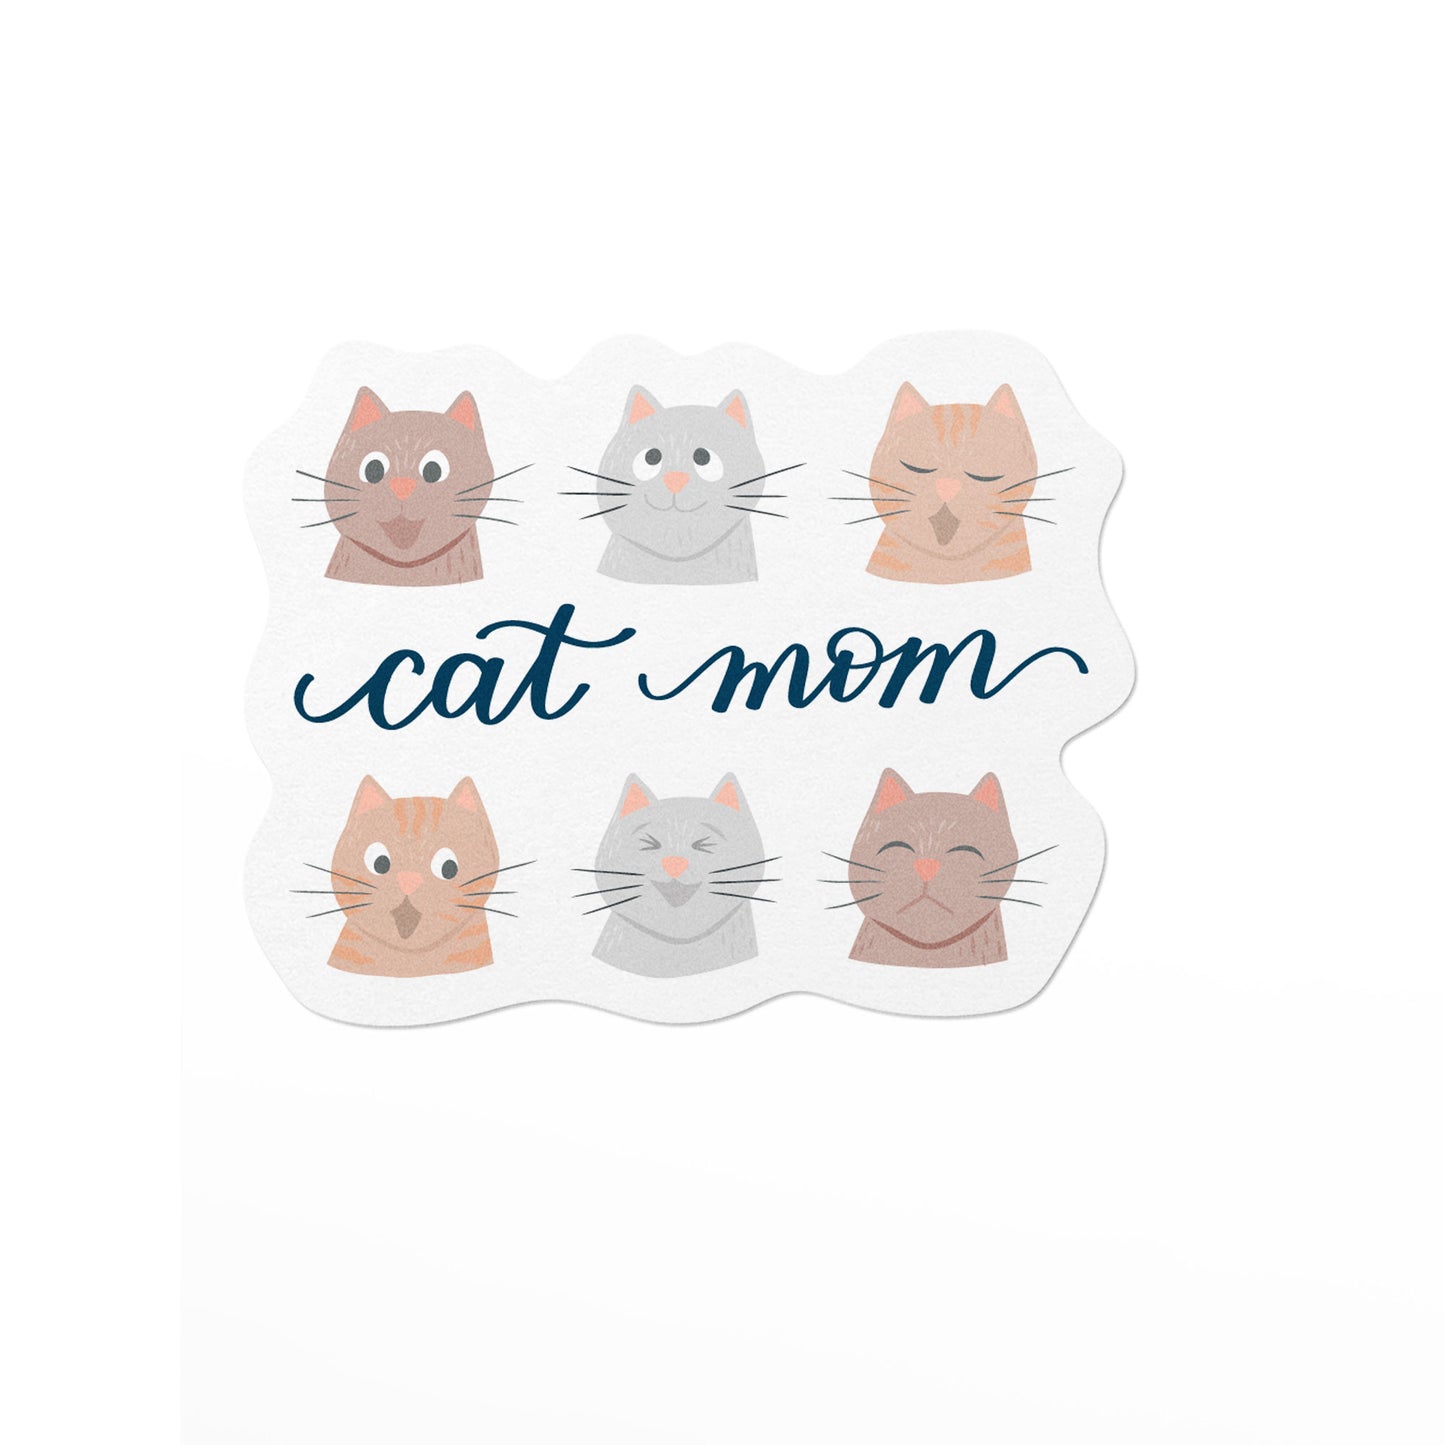 vinyl sticker with cute cat faces and the text, Cat Mom.